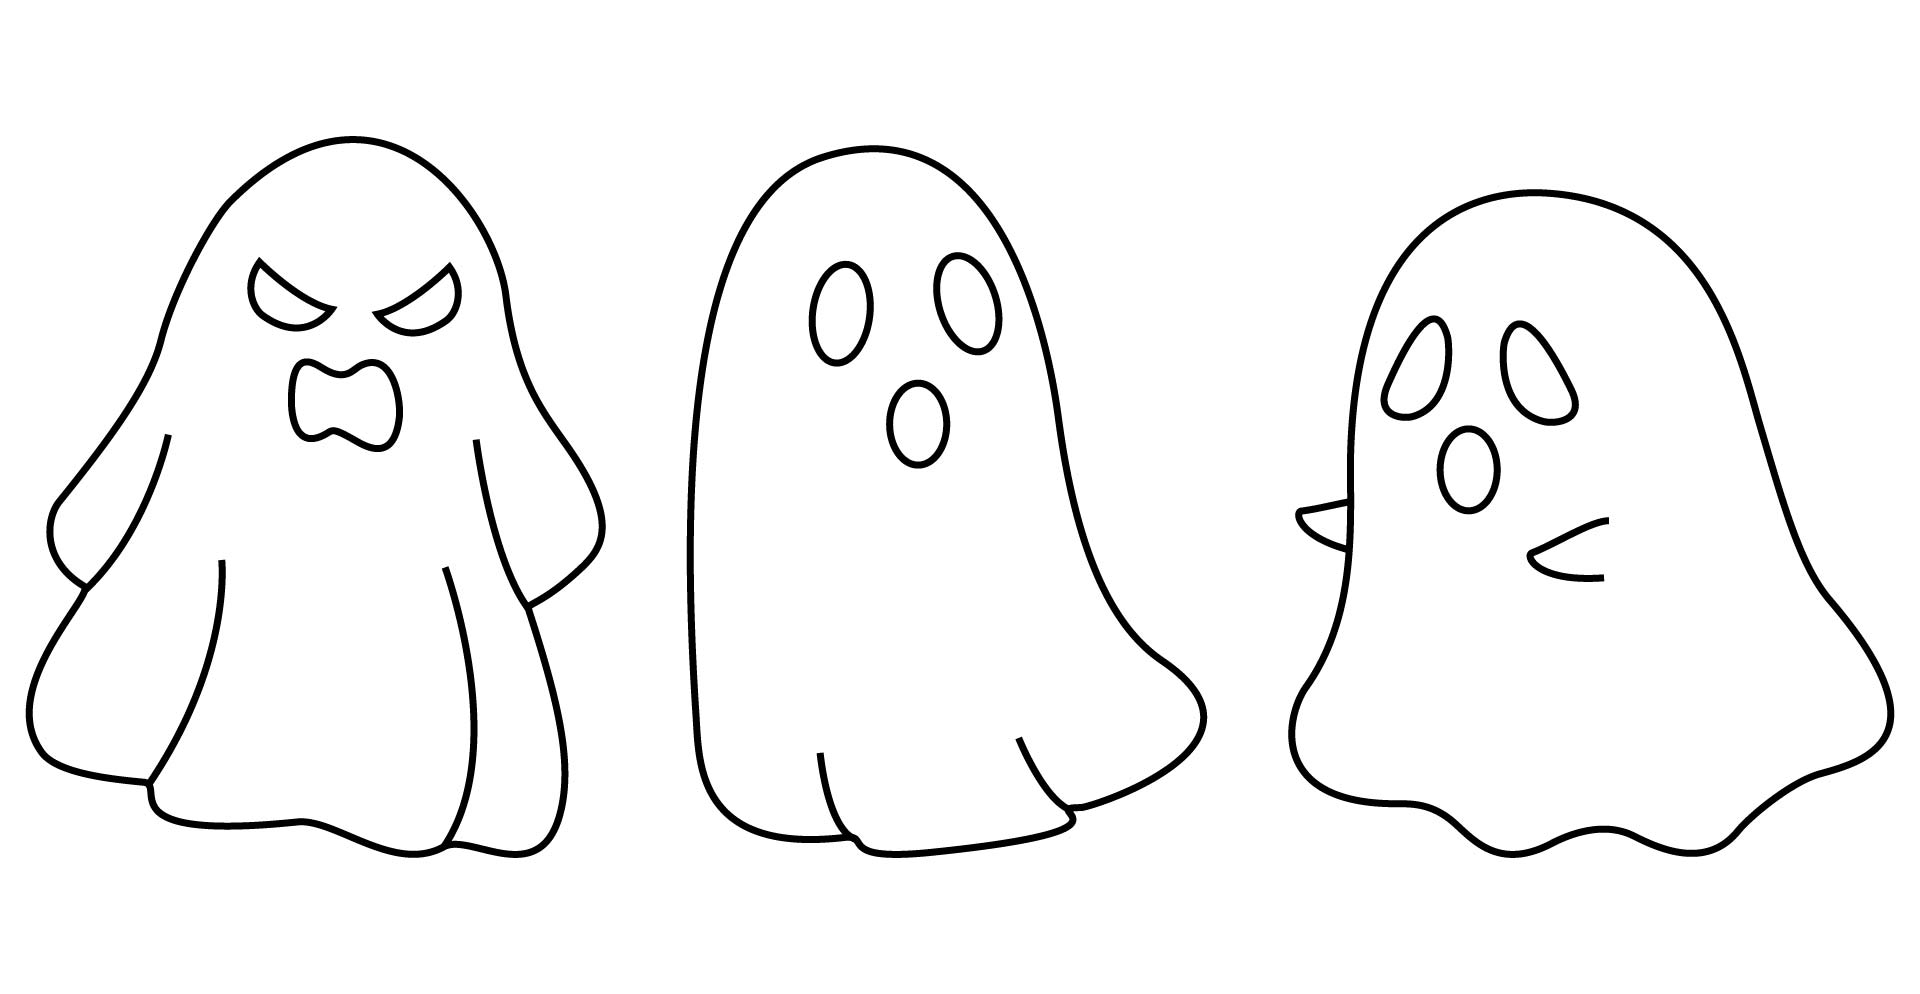 Printable Ghost Shapes For Halloween Crafts